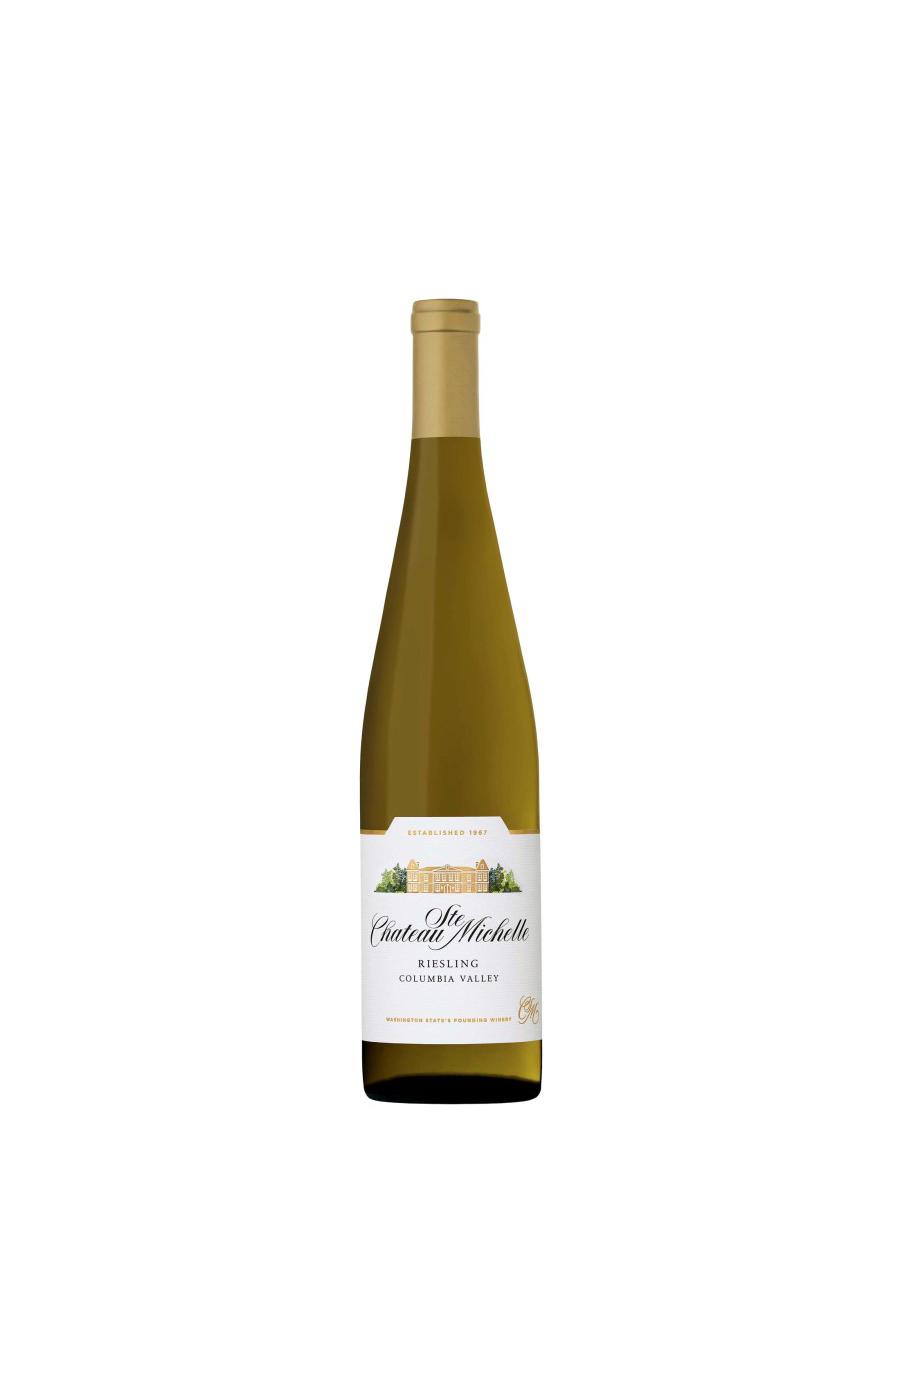 Chateau Sainte Michelle Riesling Wine; image 1 of 2